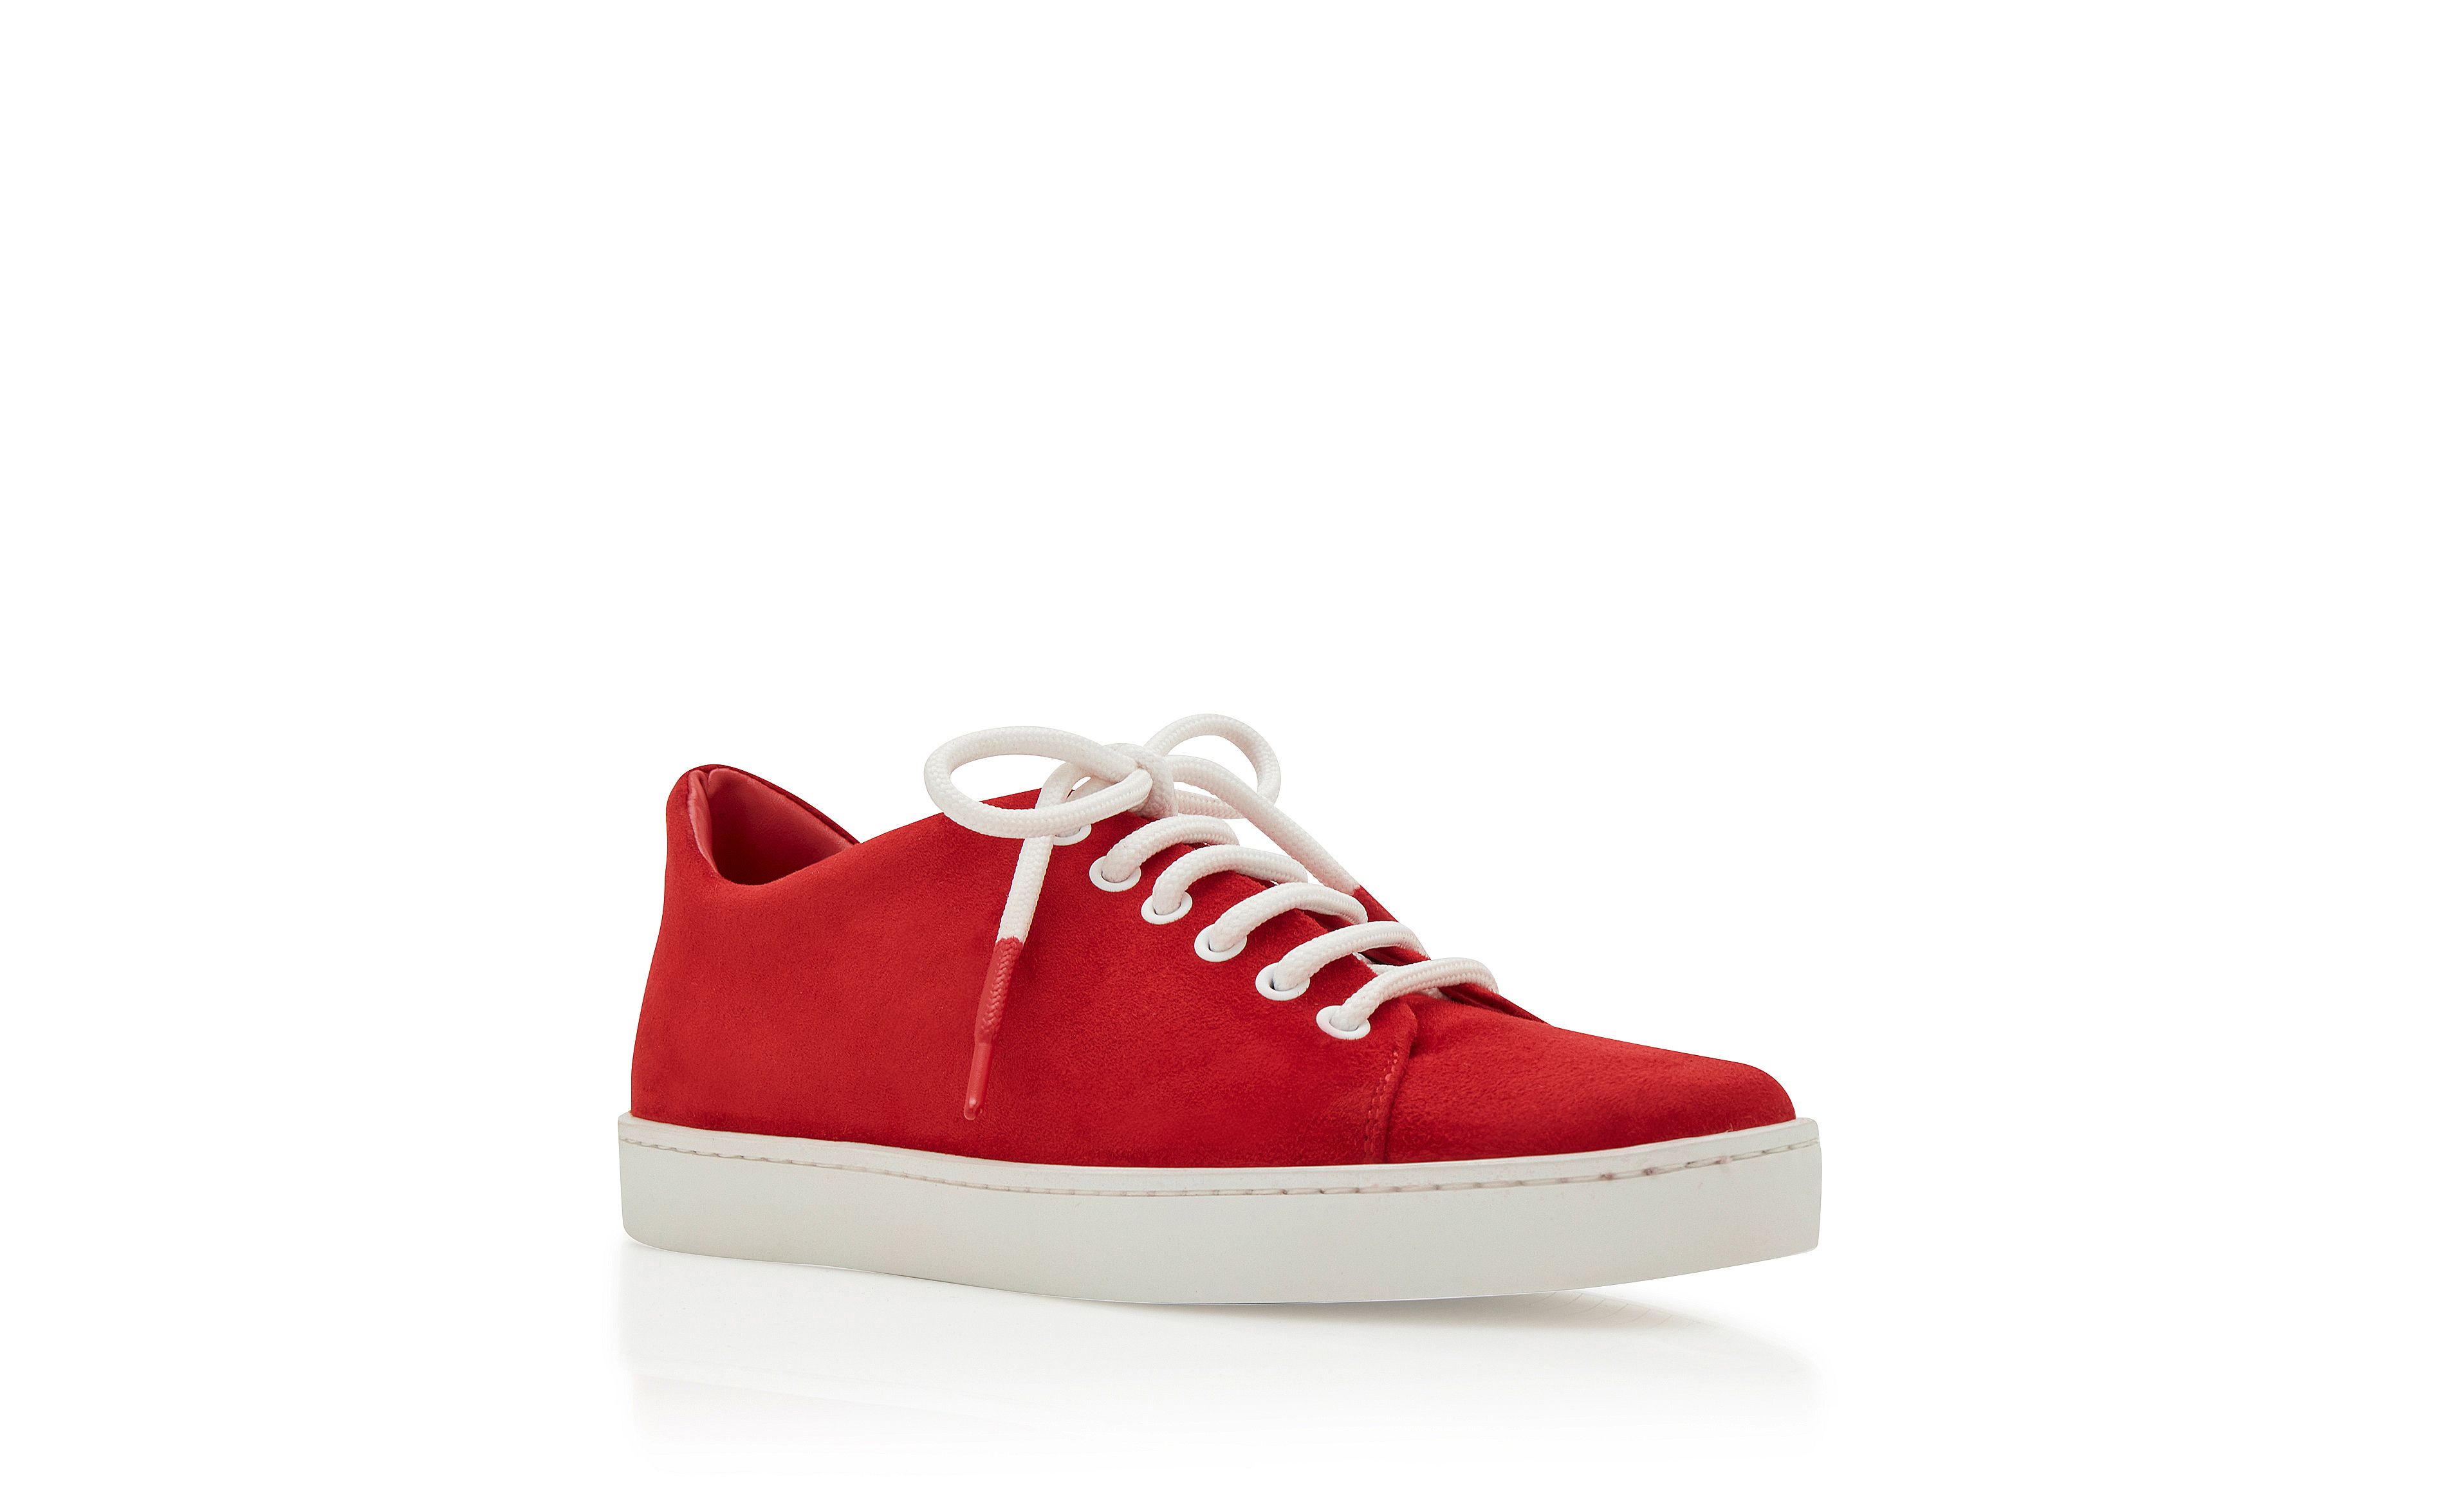 Designer Red Suede Low Cut Sneakers - Image Upsell